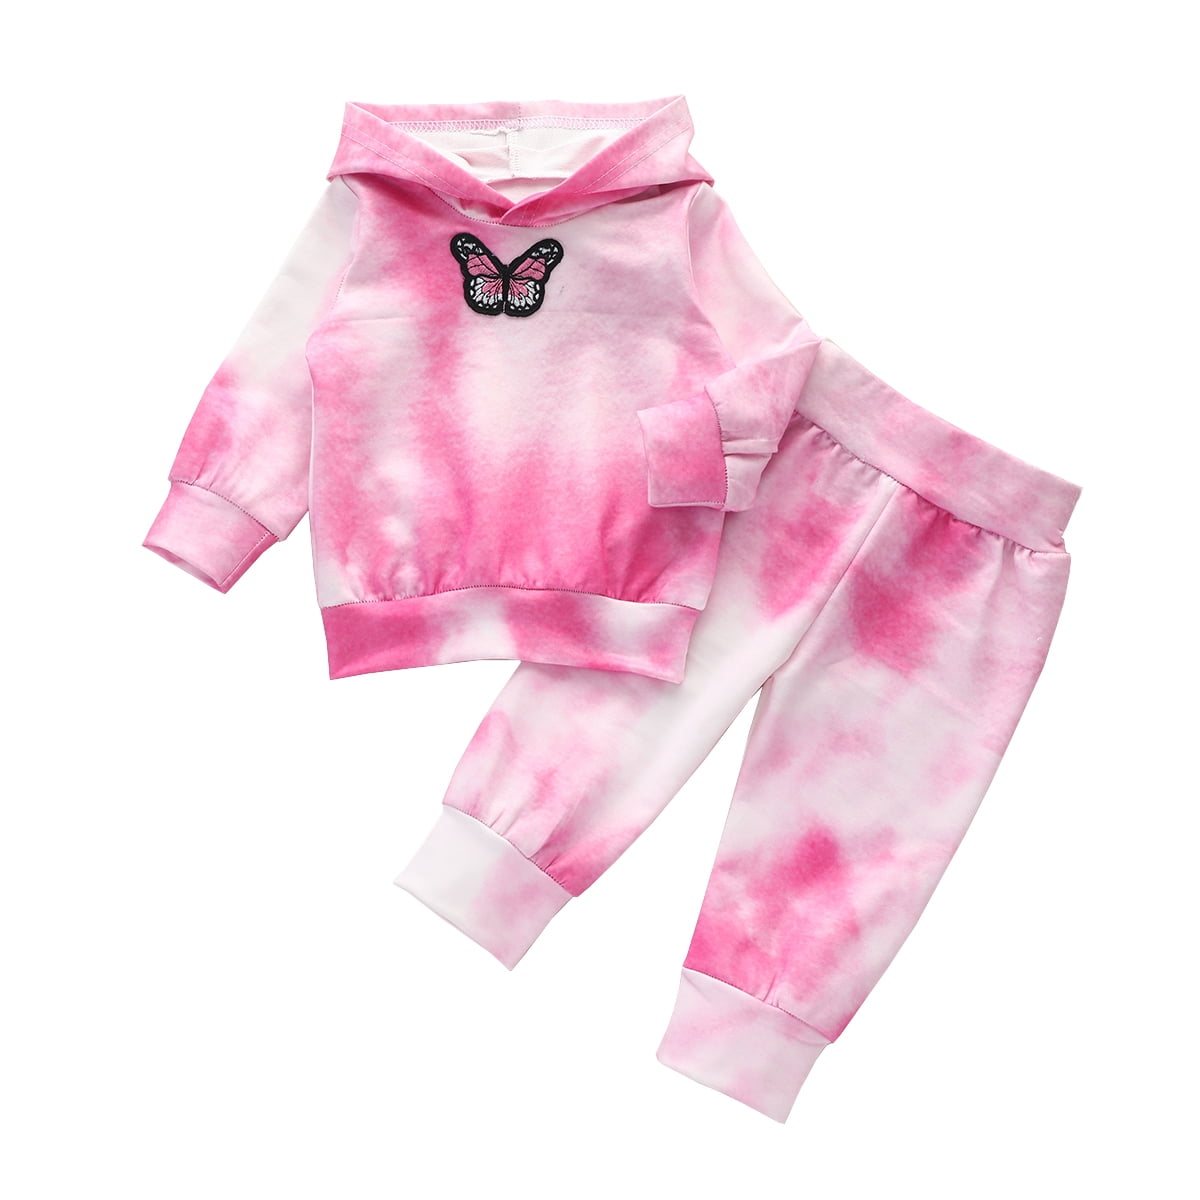 Newborn Baby Girls Winter Clothes Long Sleeve Hoodie Sweatshirt Tops Butterfly Pants 2PCs Outfit Set for 0-24 Months 